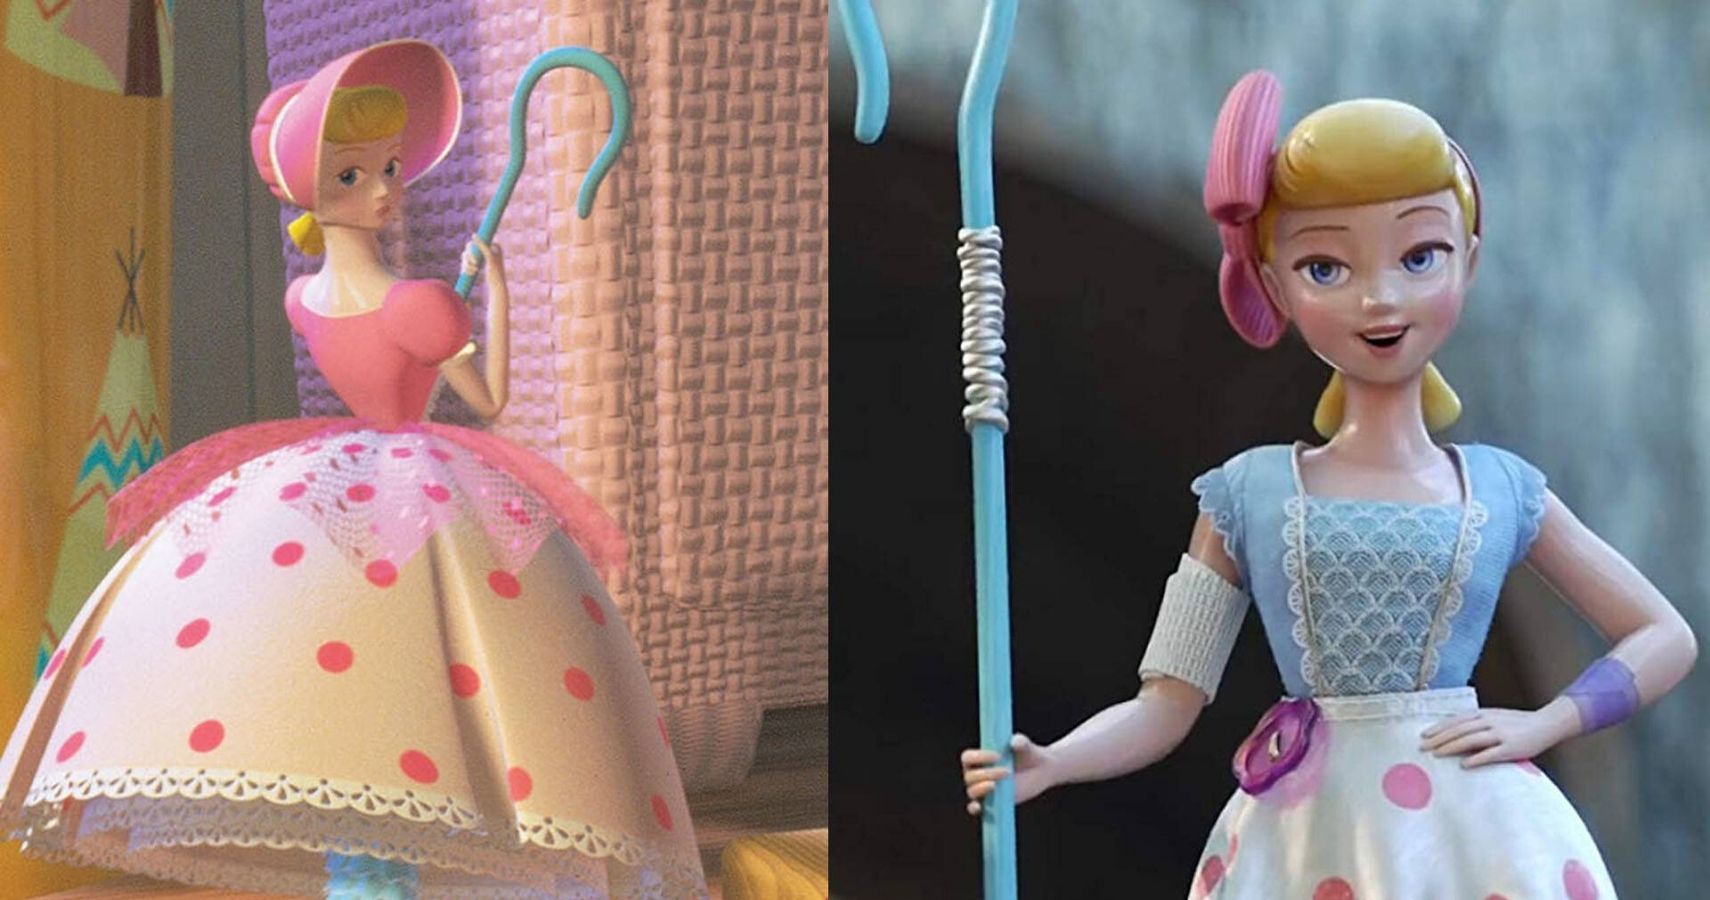 bhatt recommends Pictures Of Bo Peep From Toy Story